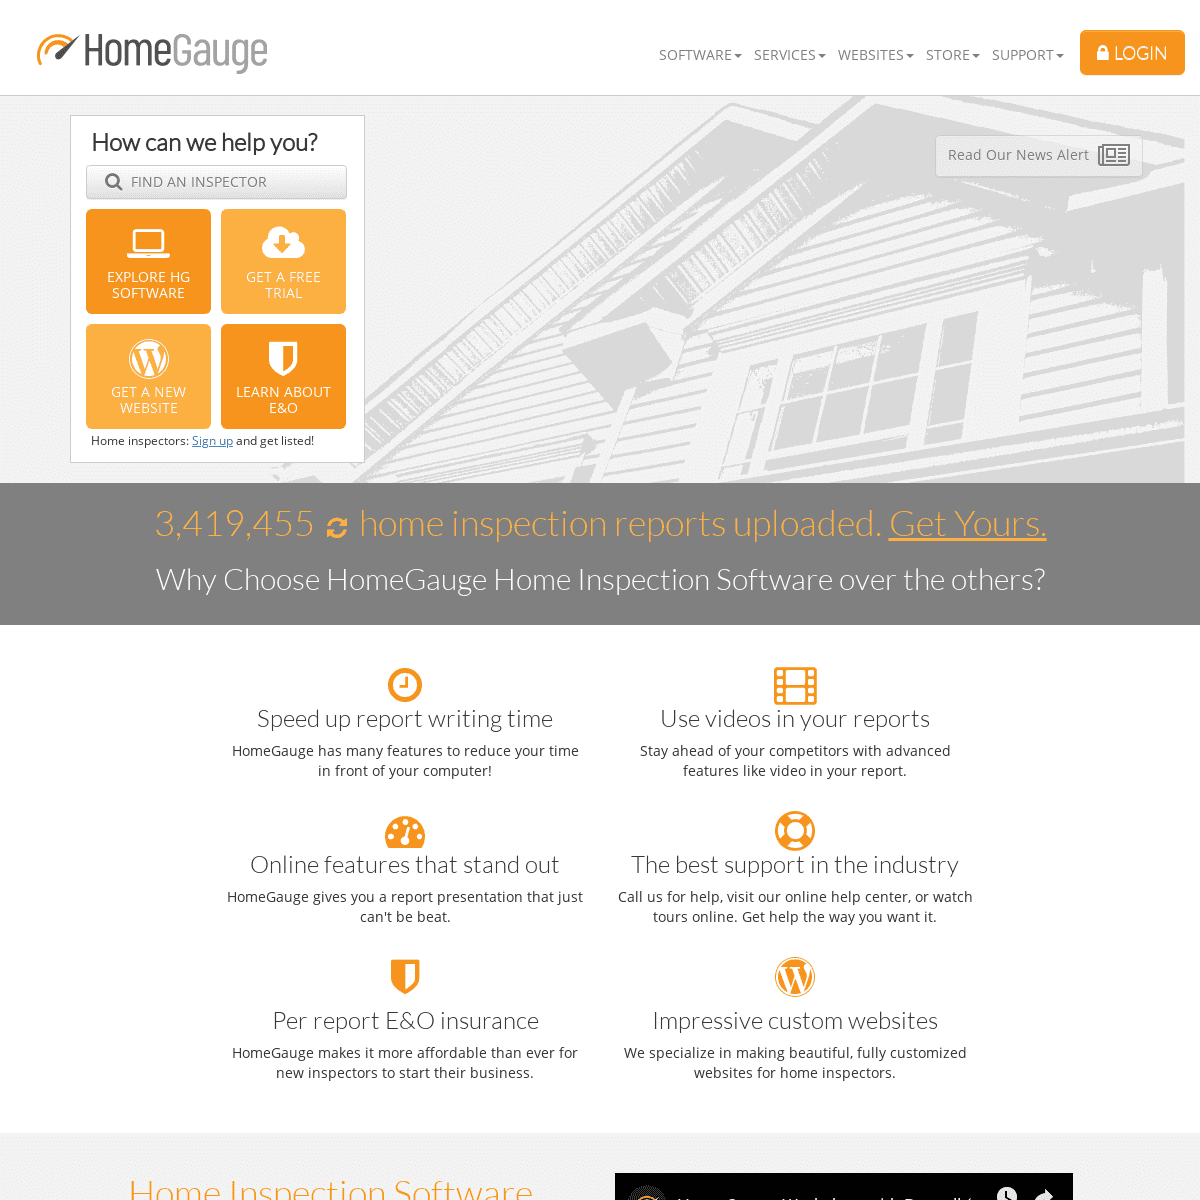 Home Inspection Software by HomeGauge